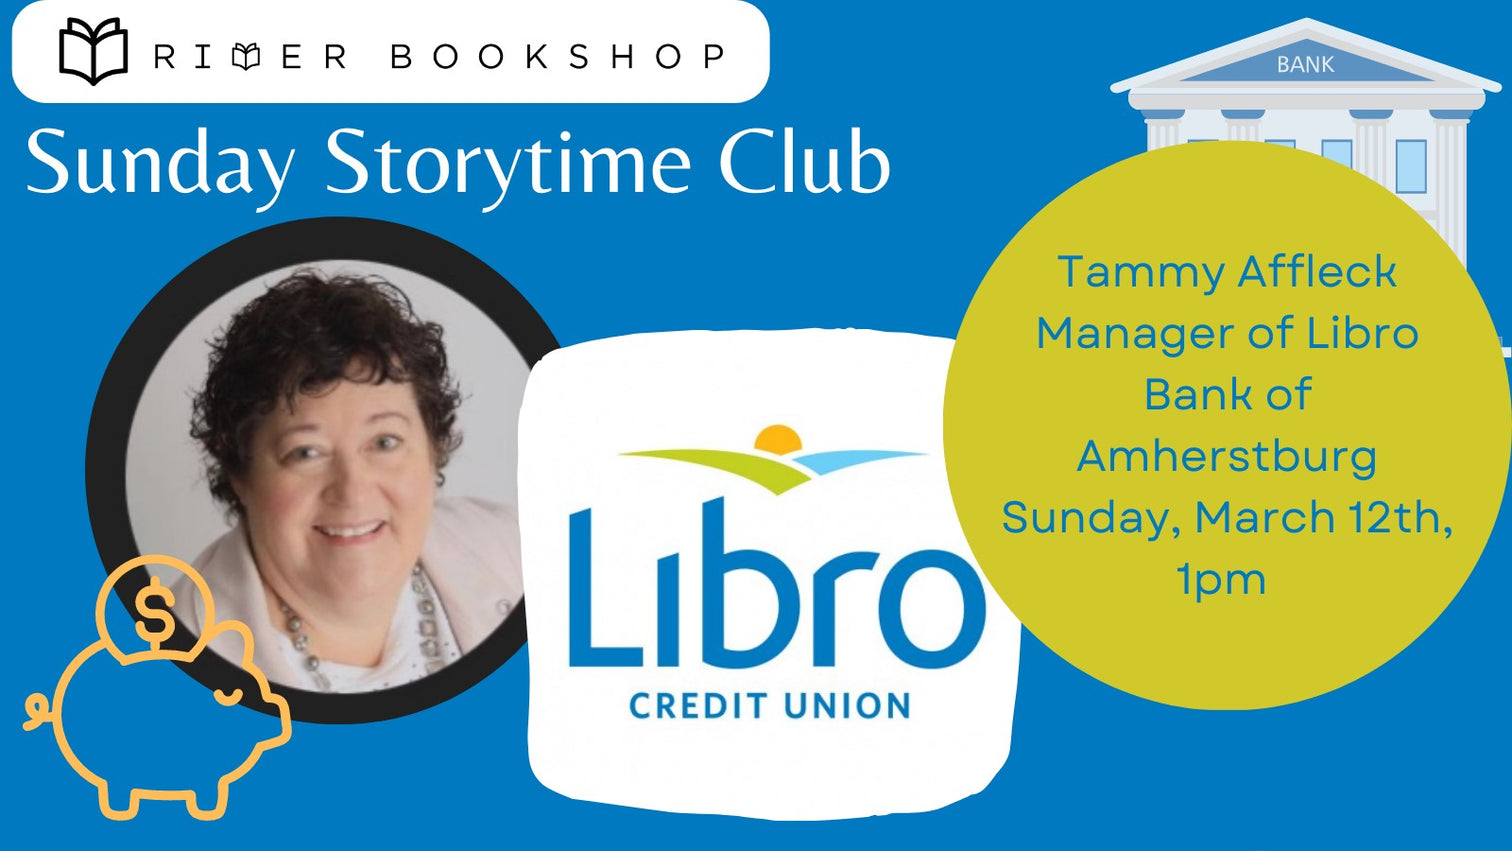 AM800 CKLW: Sunday Storytime Club at River Book Shop